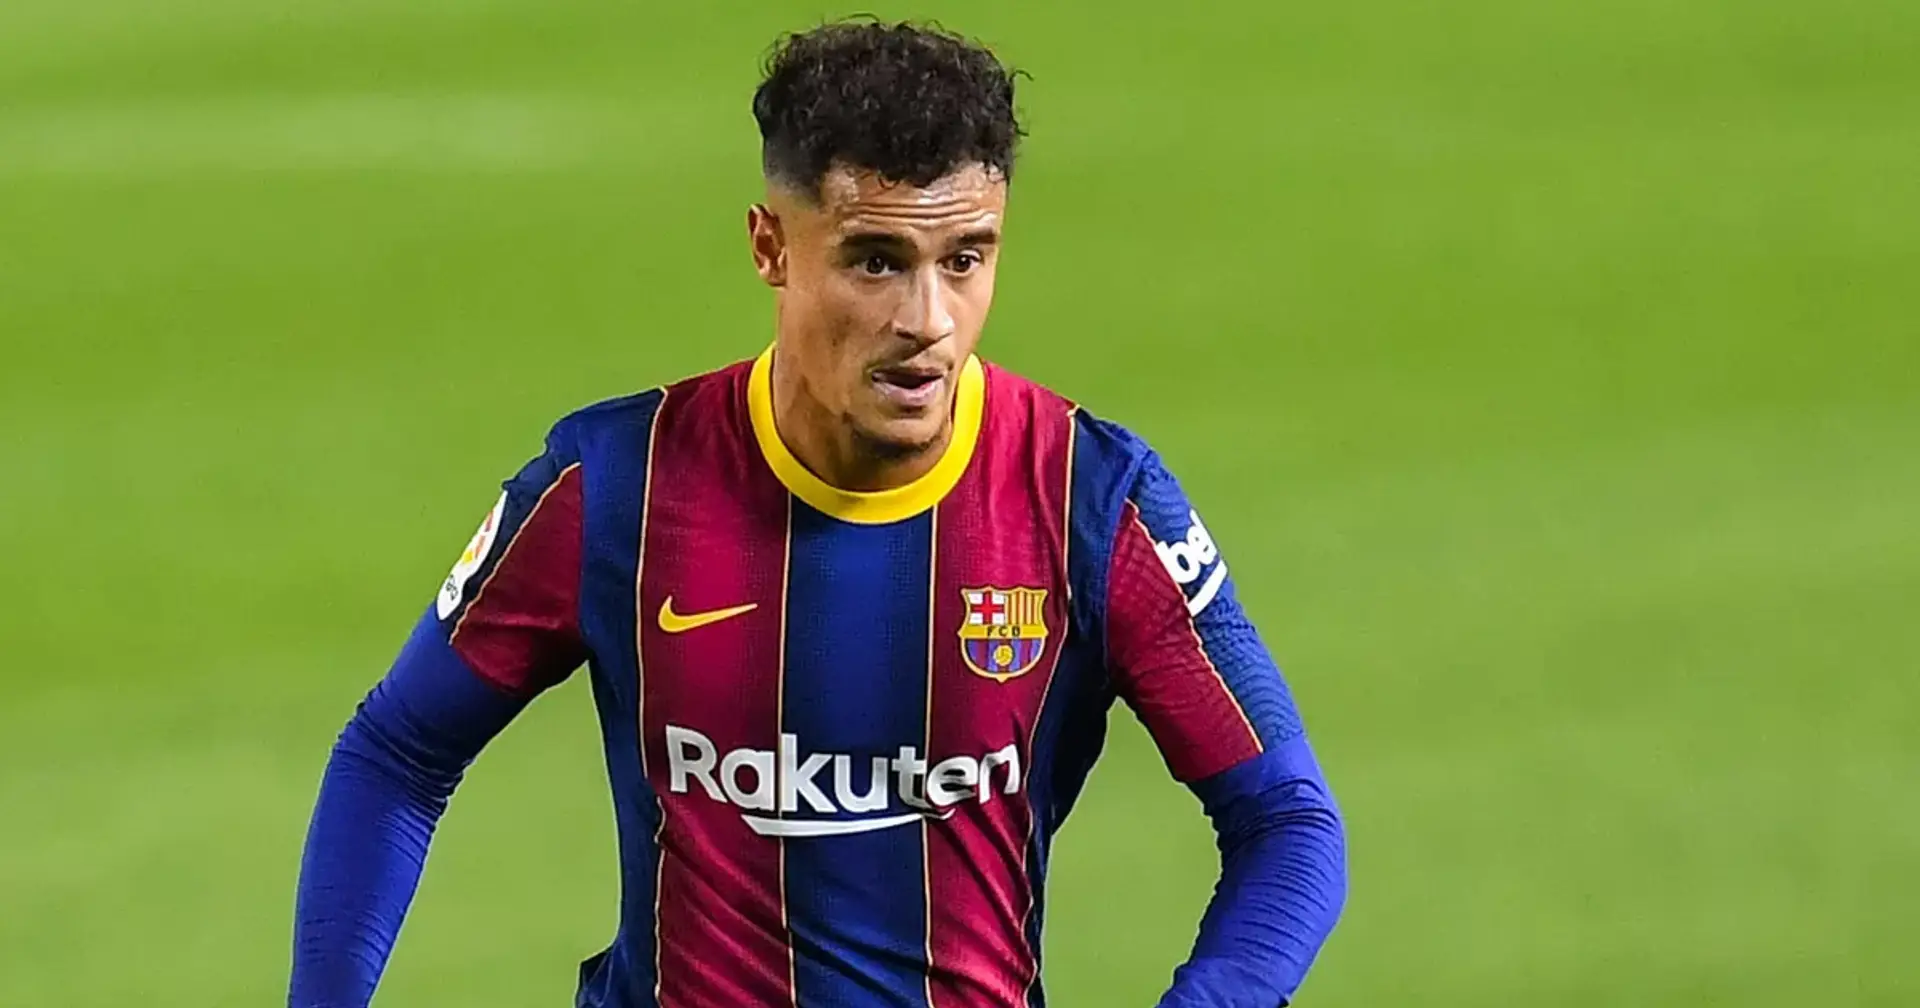 Barca fan argues Coutinho hasn't improved in comparison to previous seasons, calls for Pedri to become starter